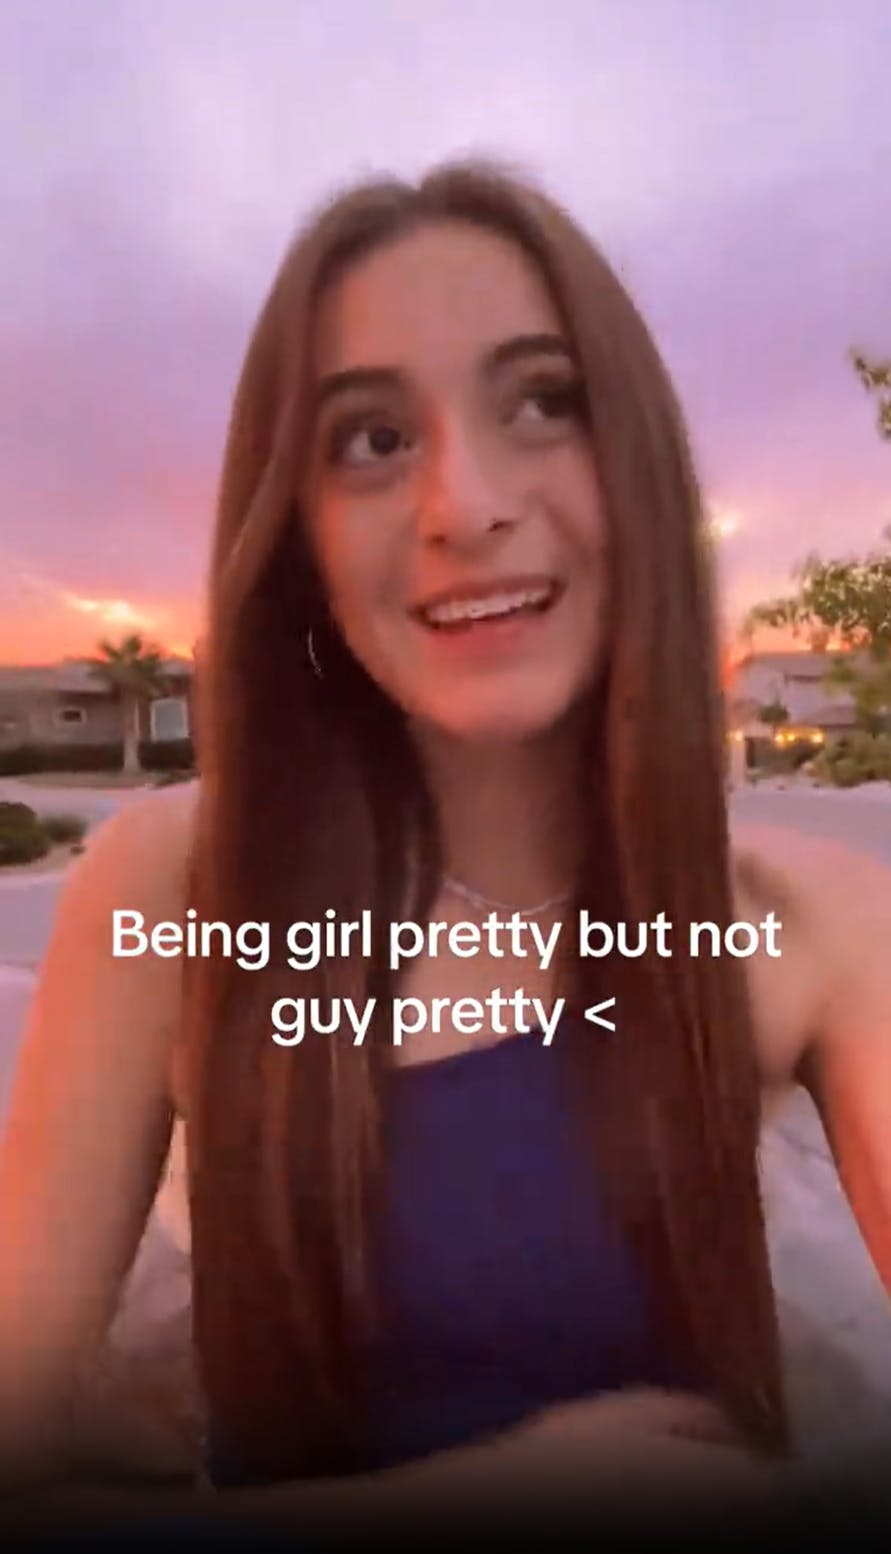 A white woman with long brown hair sitting on the ground in front of a sunset looking off to one side. Overlay text reads, 'Being girl pretty but not guy pretty